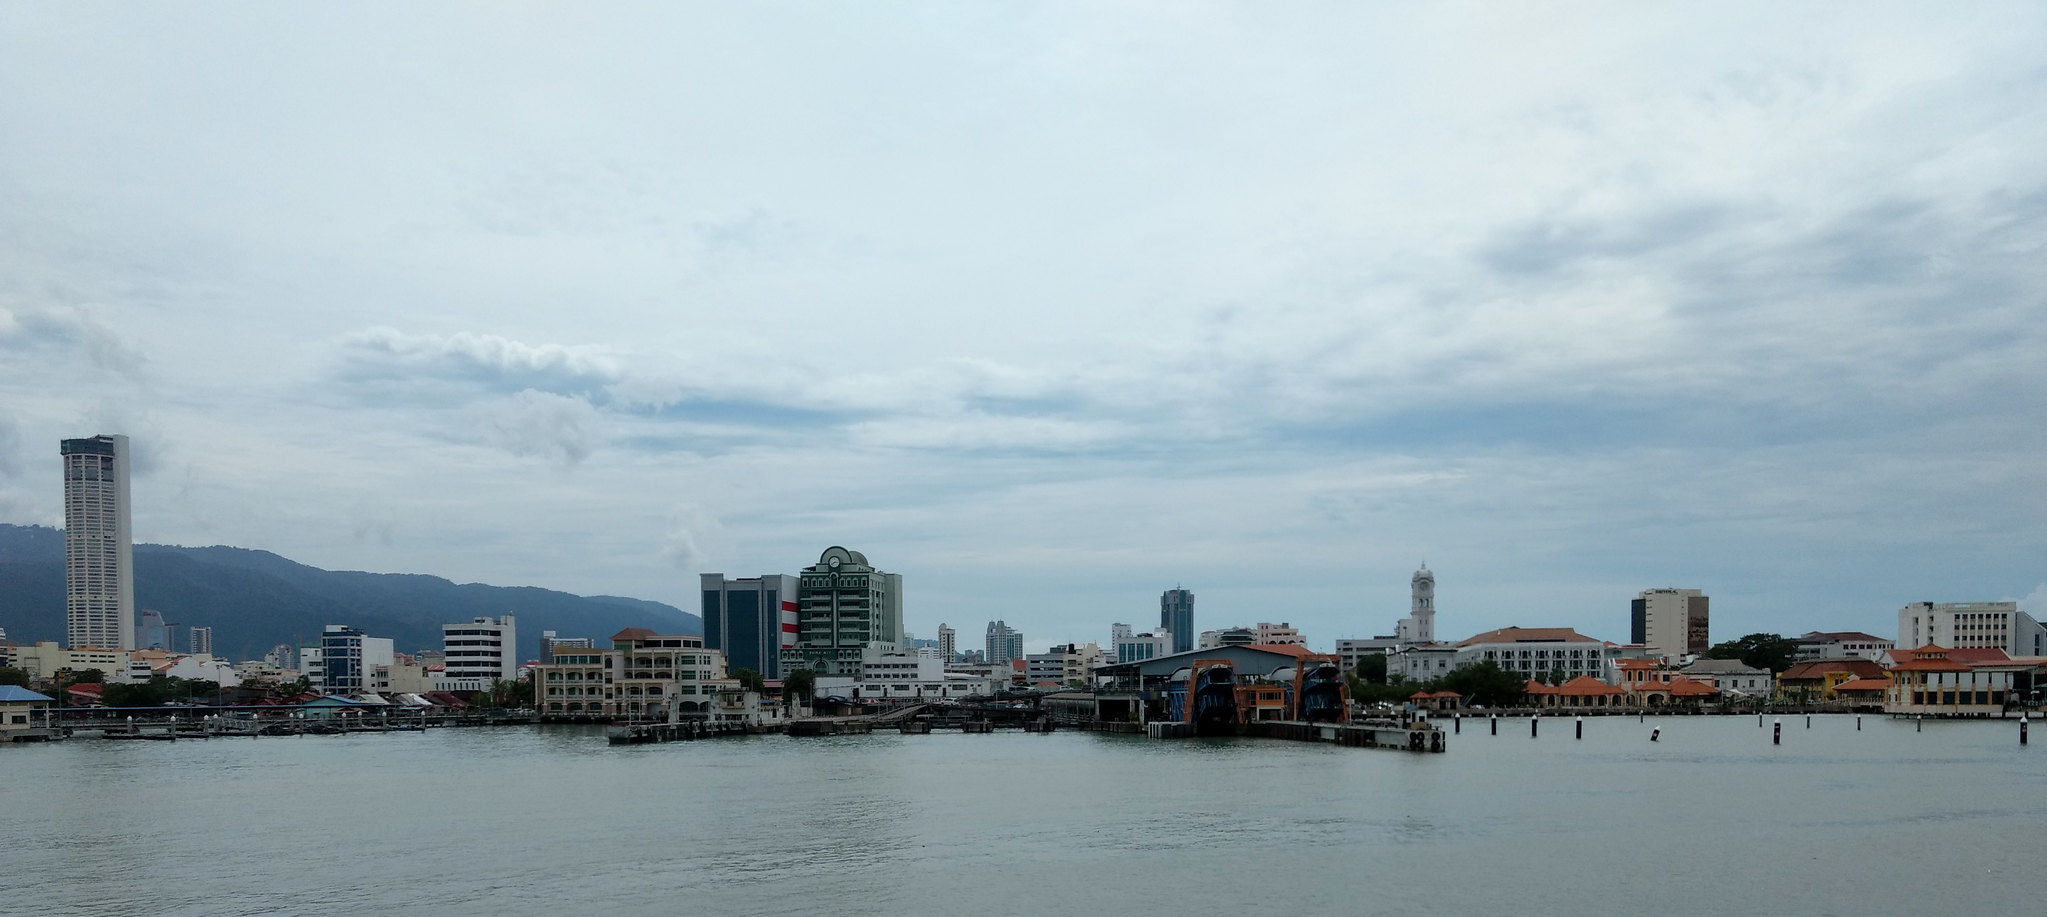 George Town not far, Penang ferry journey